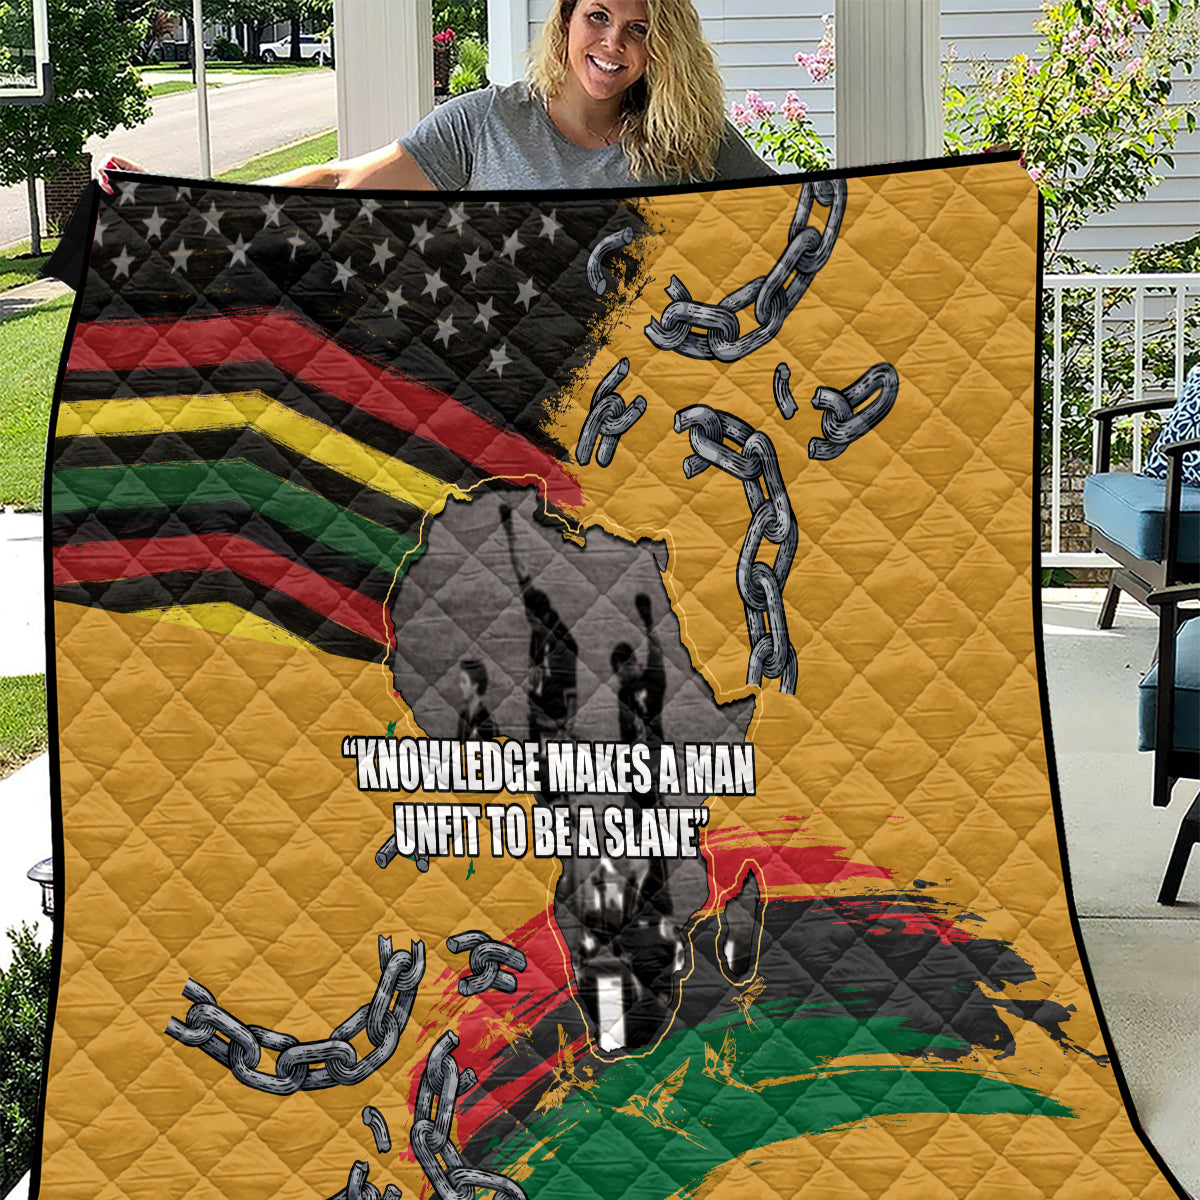 Juneteenth Freedom Day Quilt 1968 Olympics Black Power Salute Broken Chain